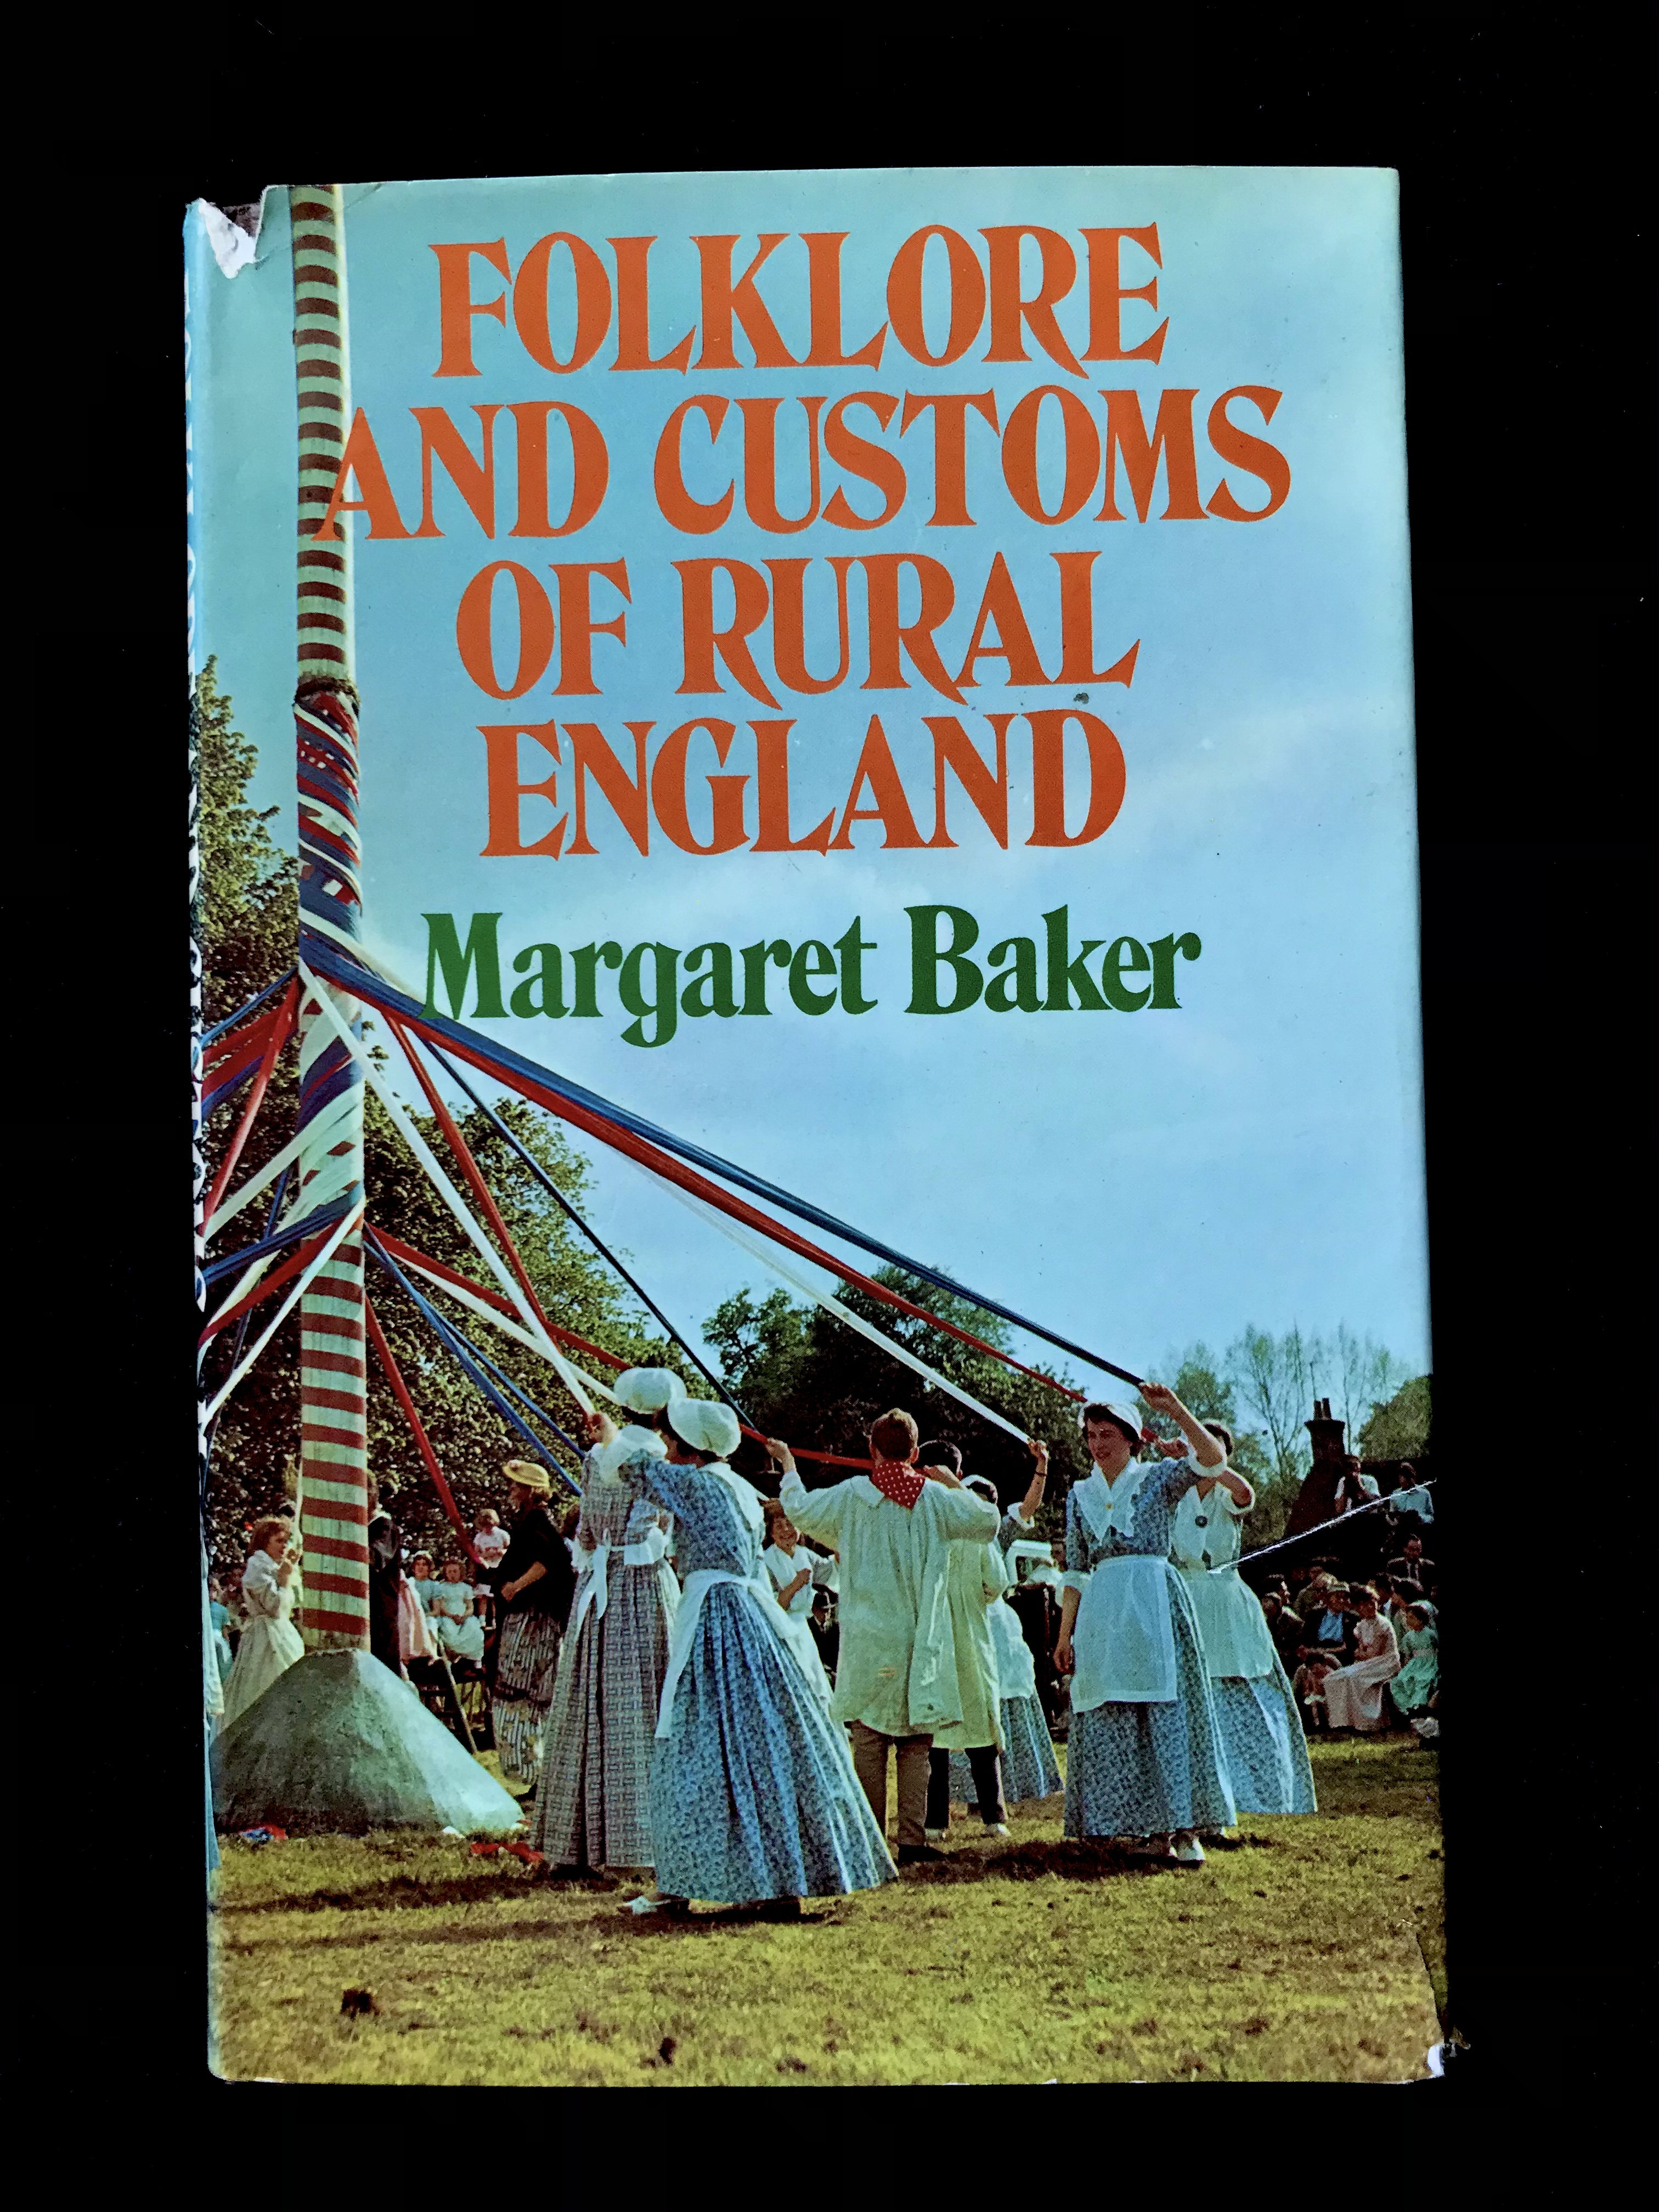 Folklore And Customs of Rural England by Margaret Baker